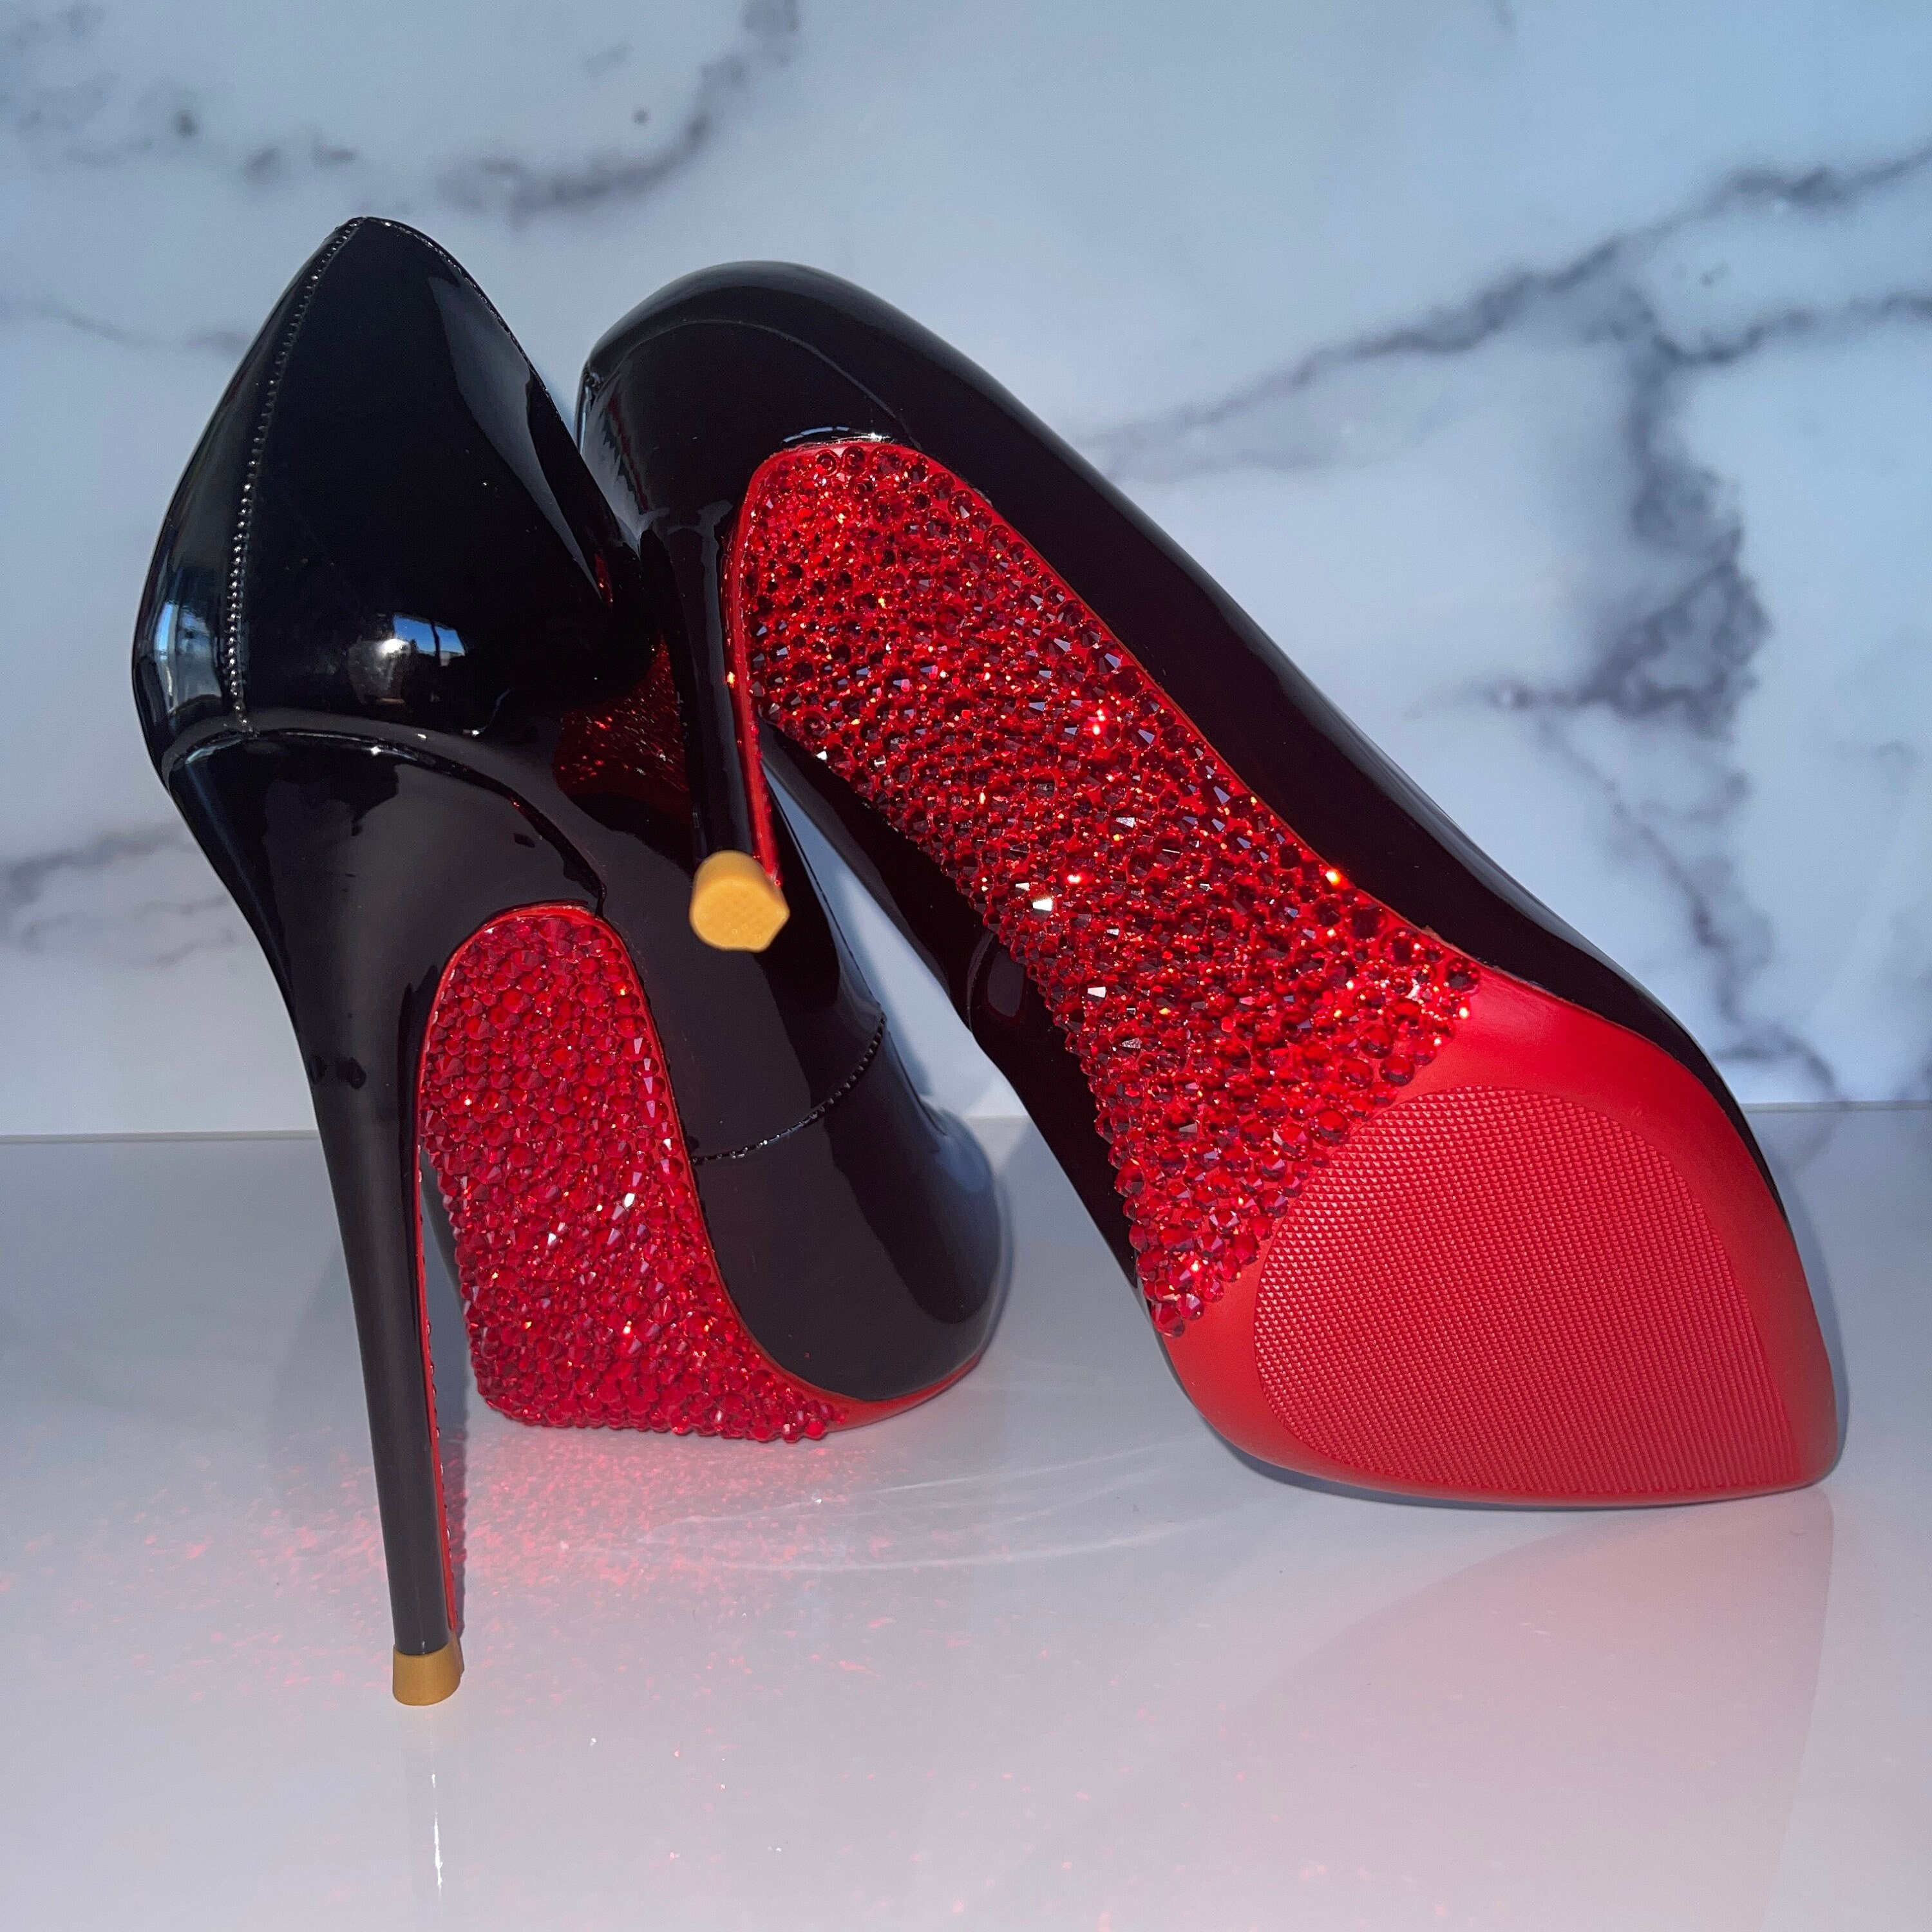 shoes louis vuitton high heels black red red high heels luxury brands  Louis  vuitton high heels, Louis vuitton shoes heels, Christian louboutin shoes